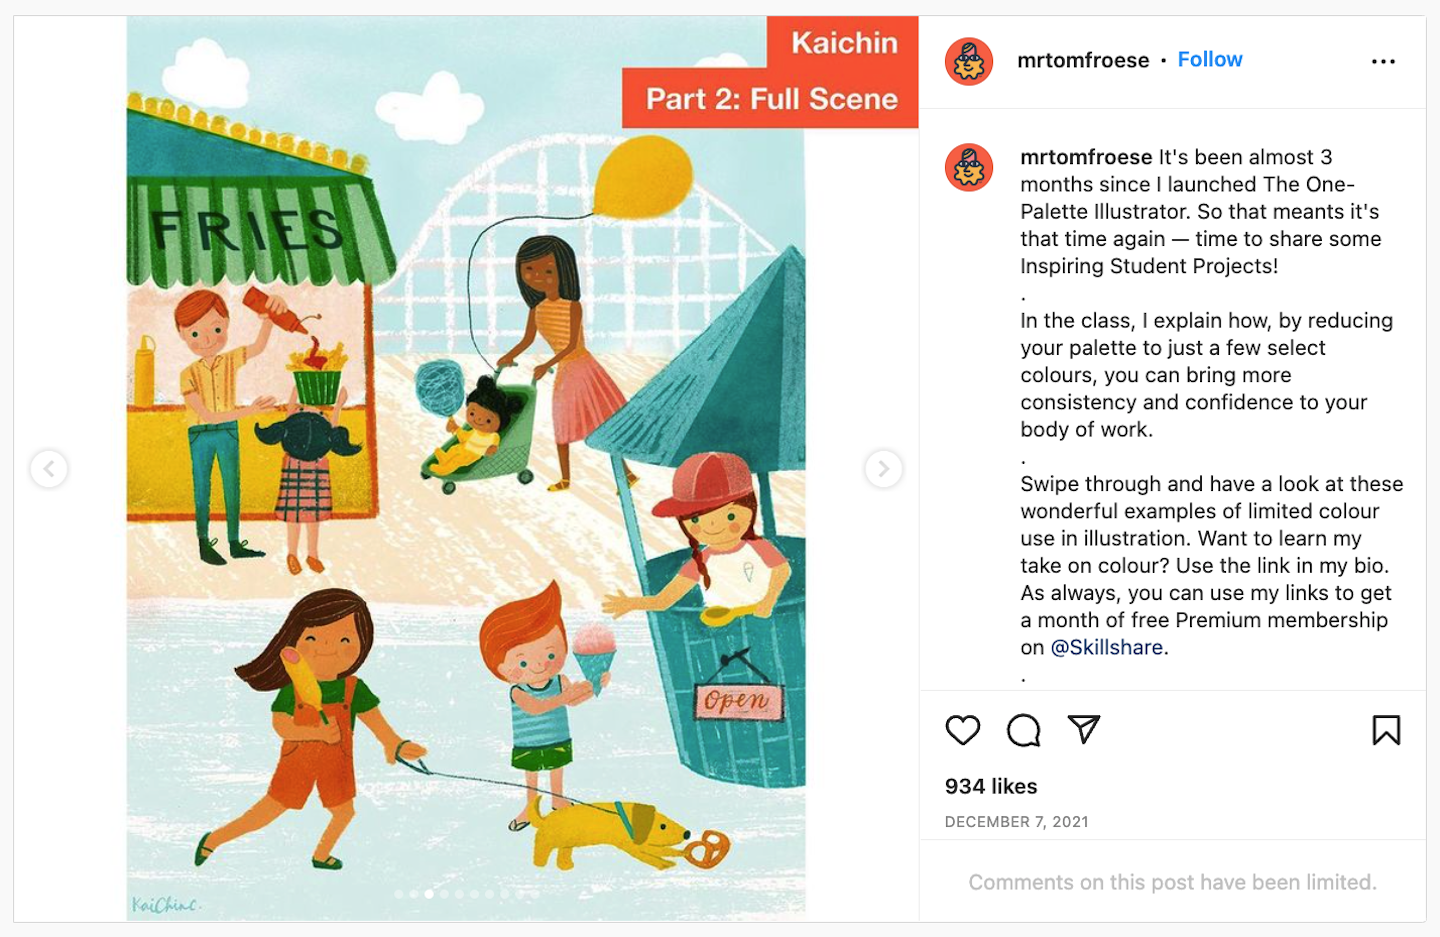 Instagram post with a student project showing children at an amusement park. One walking a little dog, one eating a snow cone, one buying an order of fries at a concession stand. A woman in the background pushes a baby in a stroller with a large yellow balloon attached. In the far background is a roller coaster.